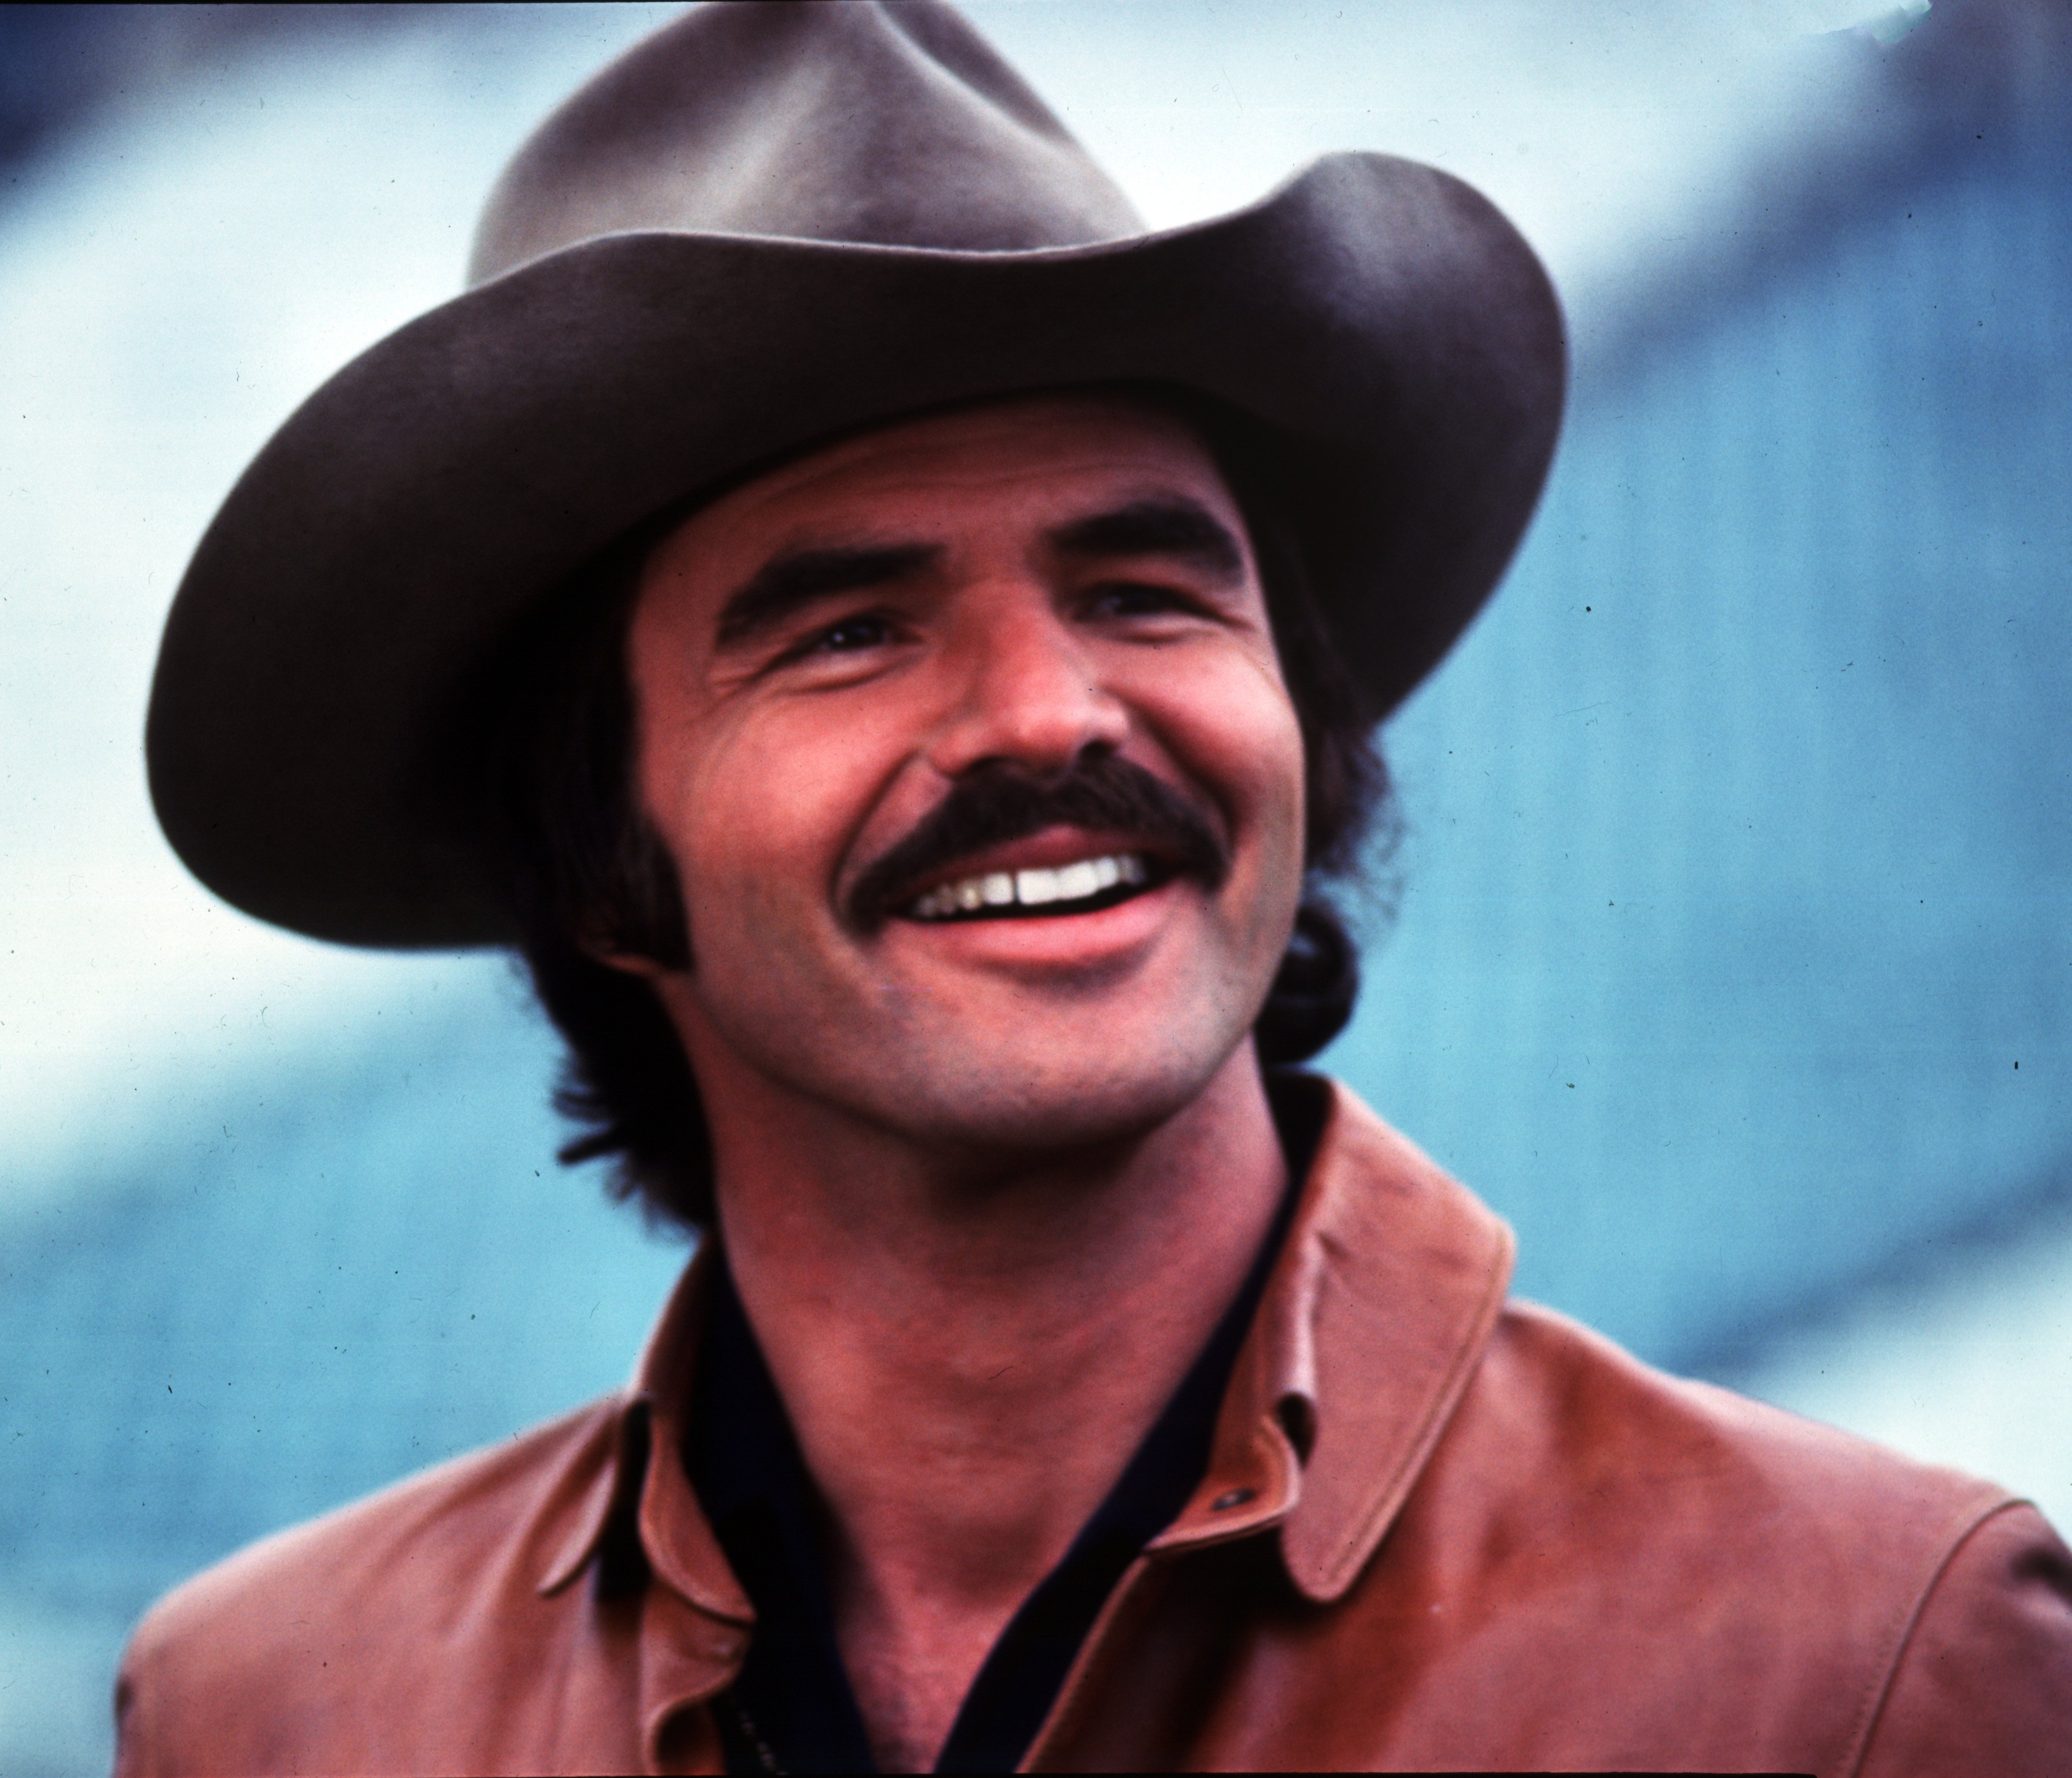 Burt Reynolds photographed in the 1960s. | Source: Getty Images